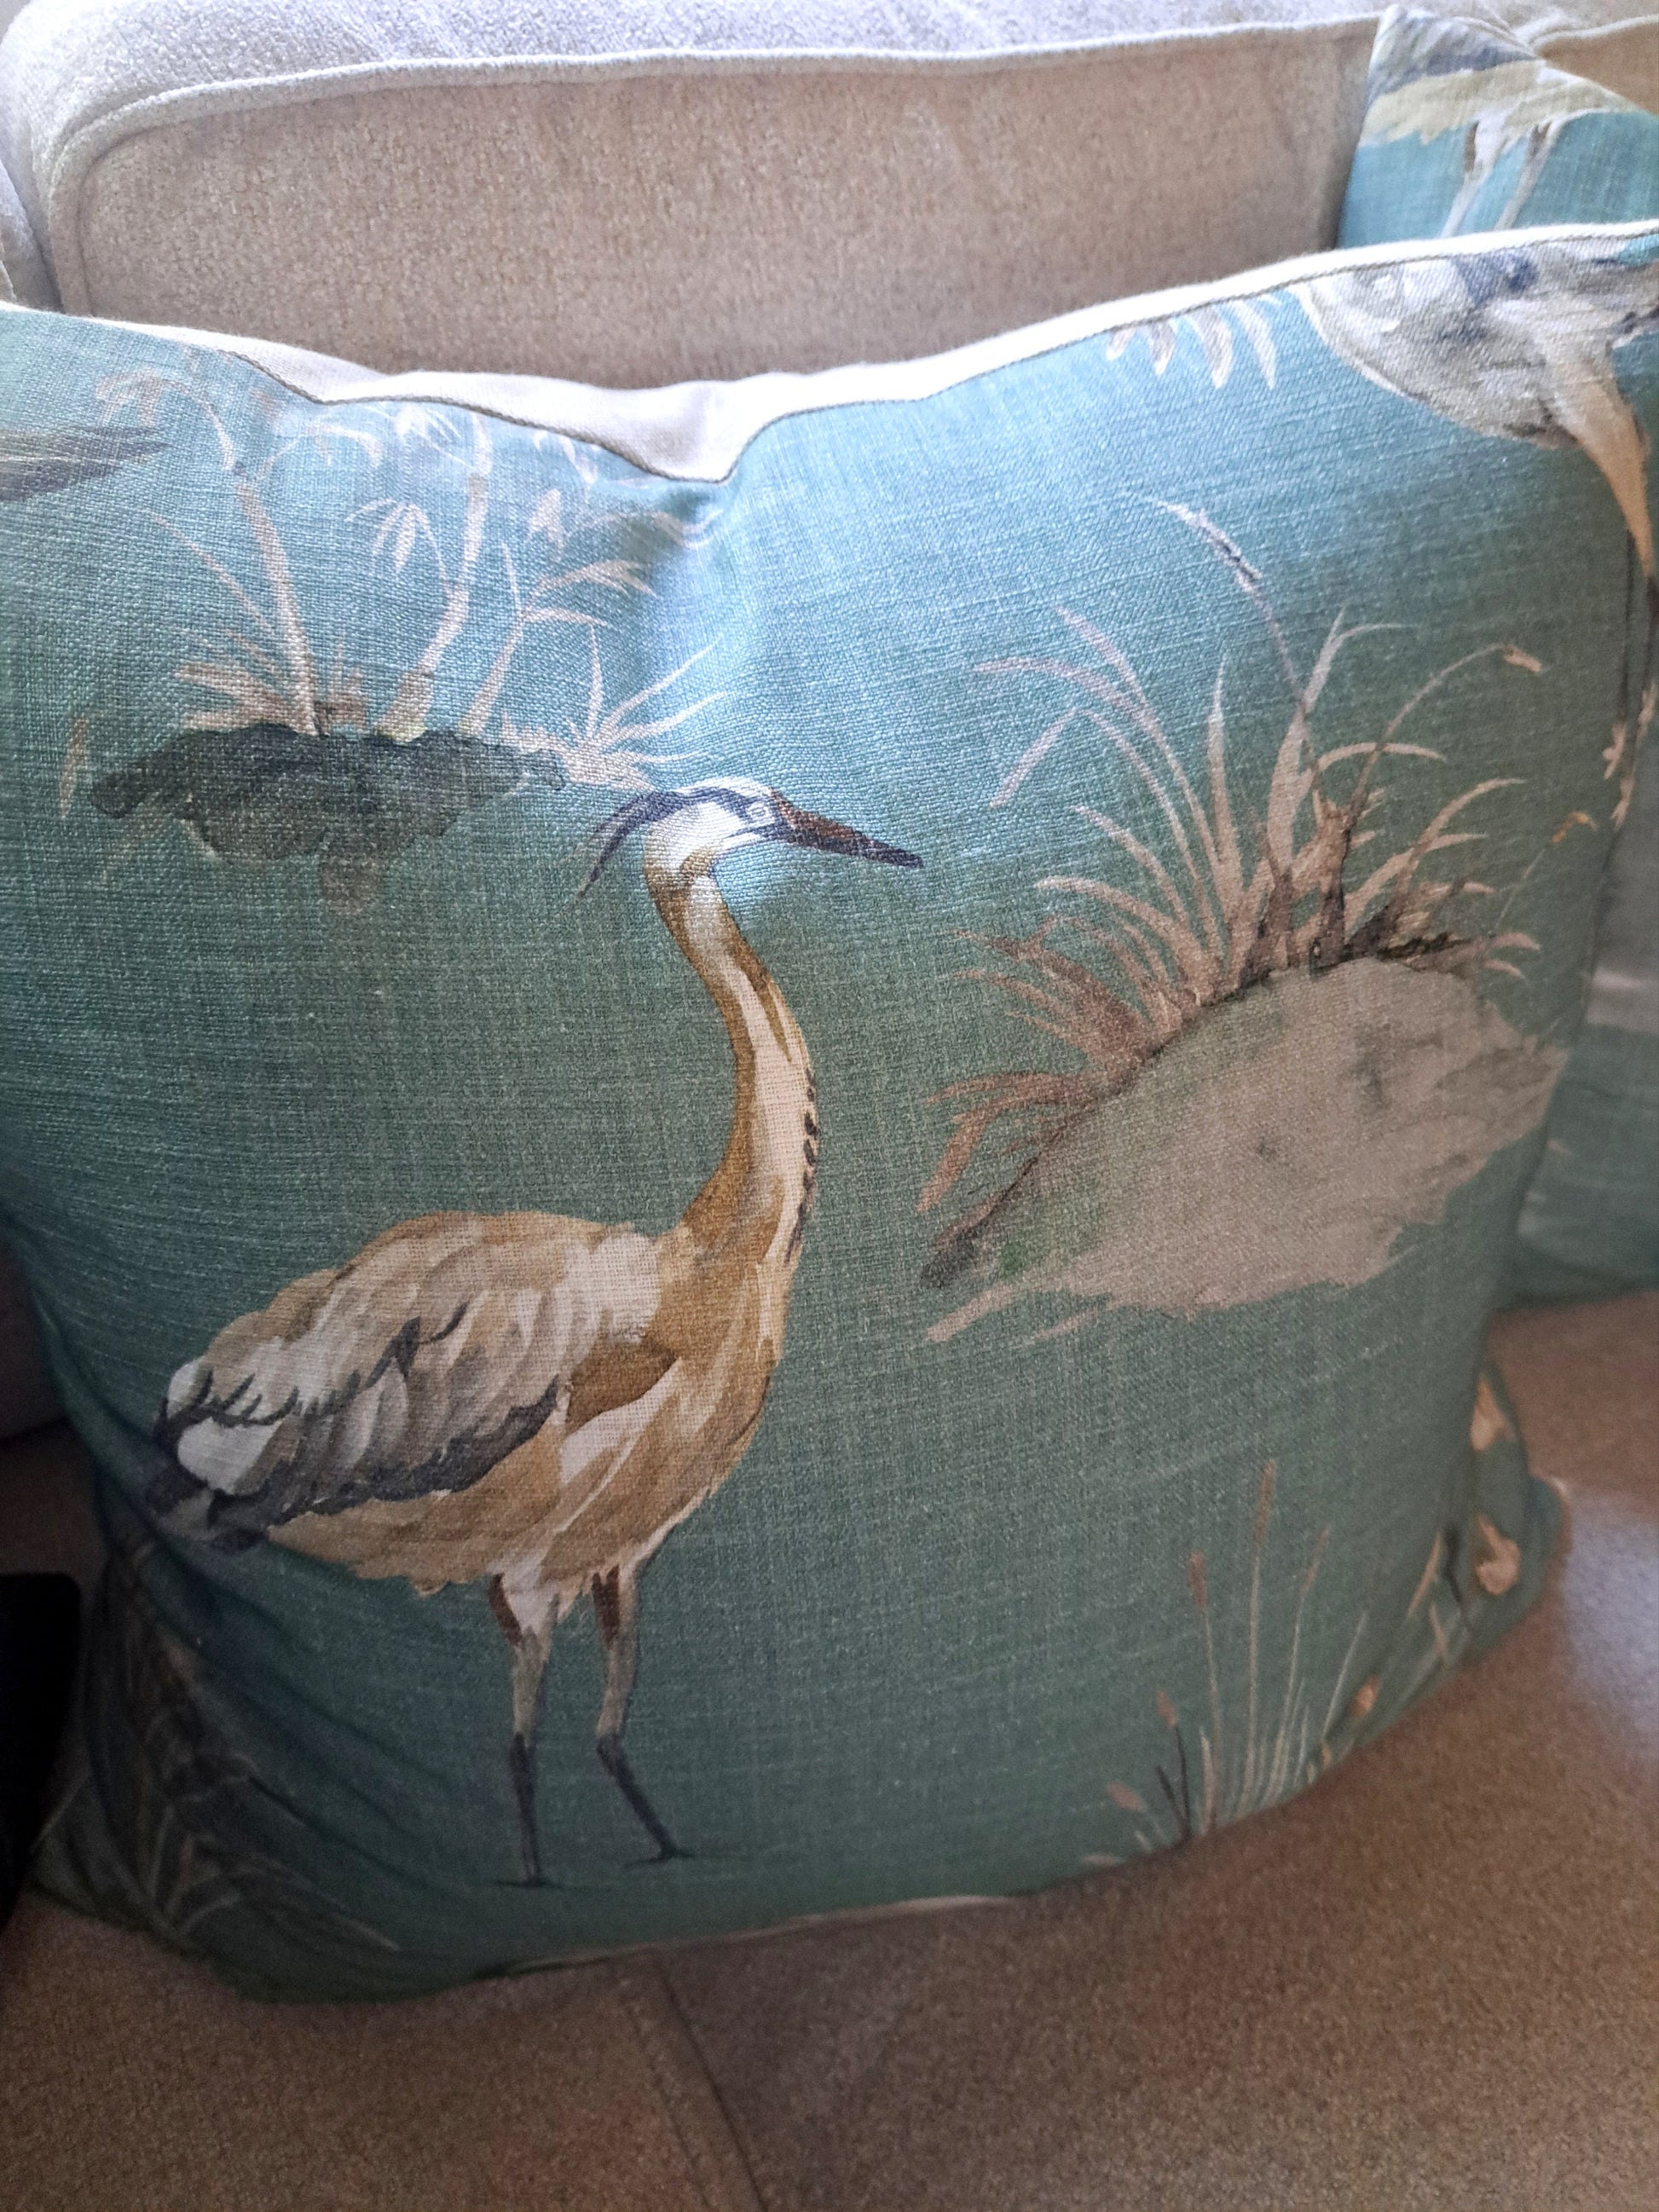 Heron and Seagrass Print Pillow Cover